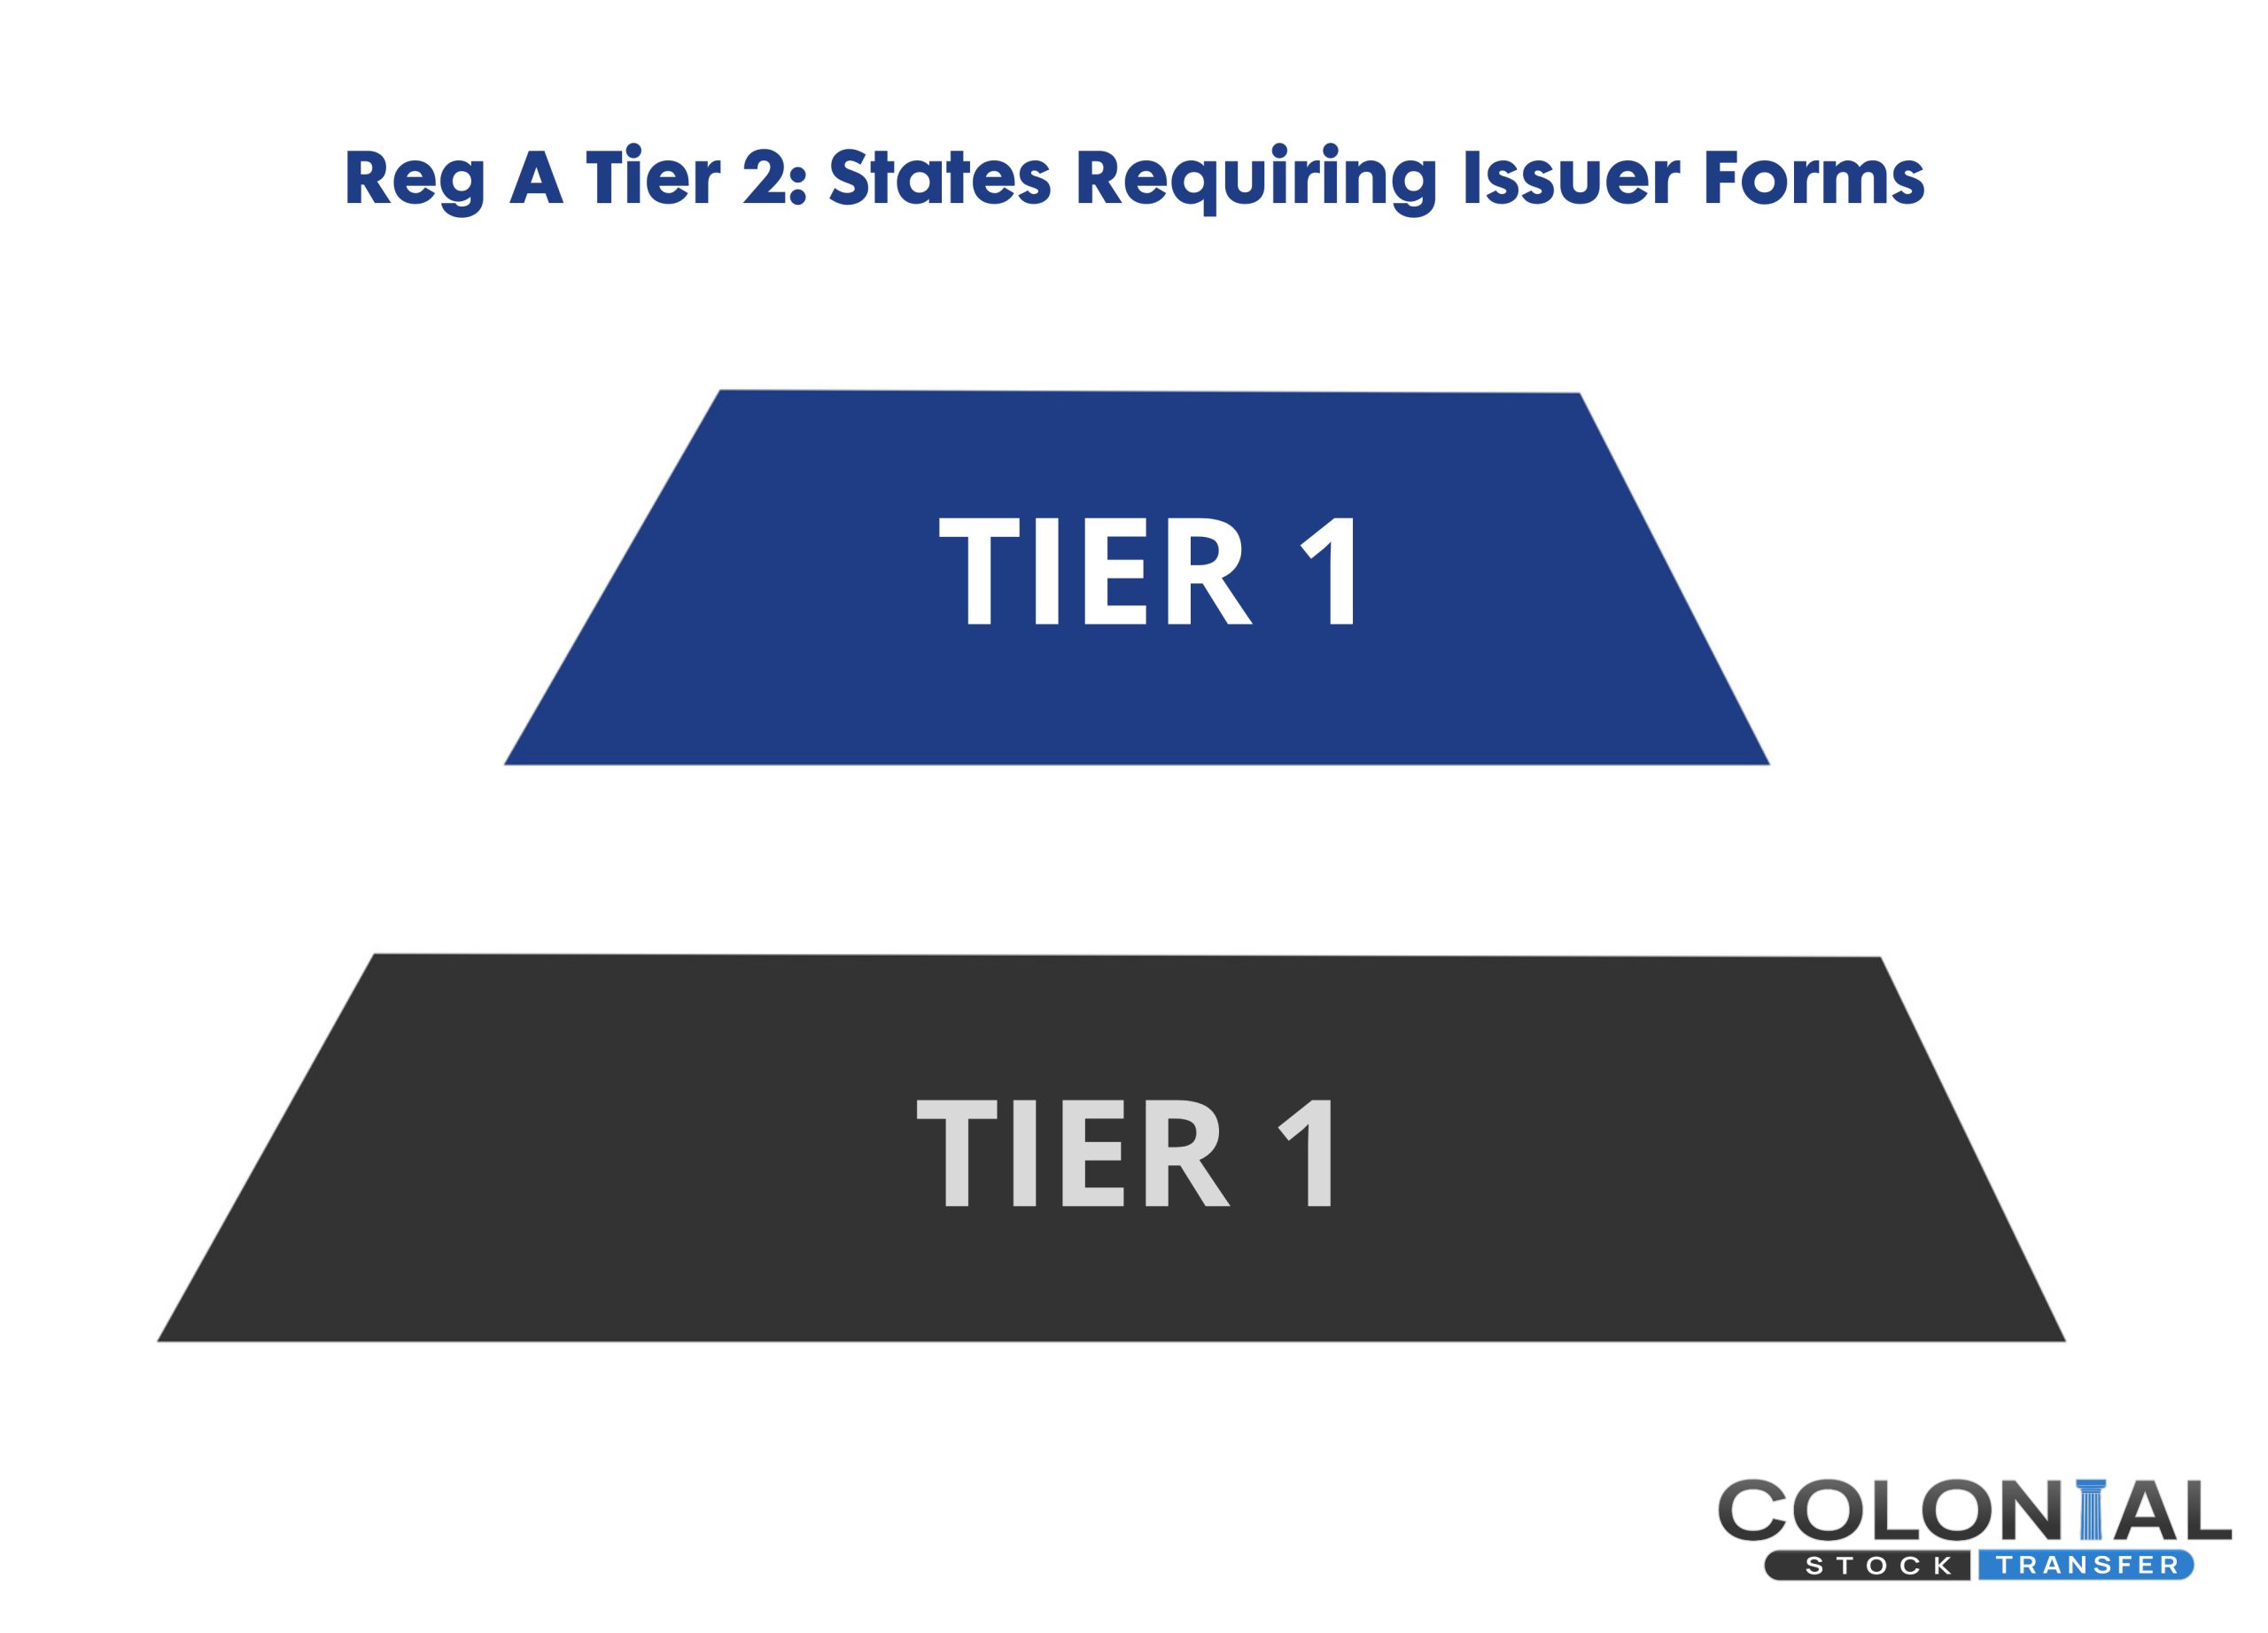 What states require Issuer Dealer and Issuer Agent forms for Regulation A Tier 2 Offerings?